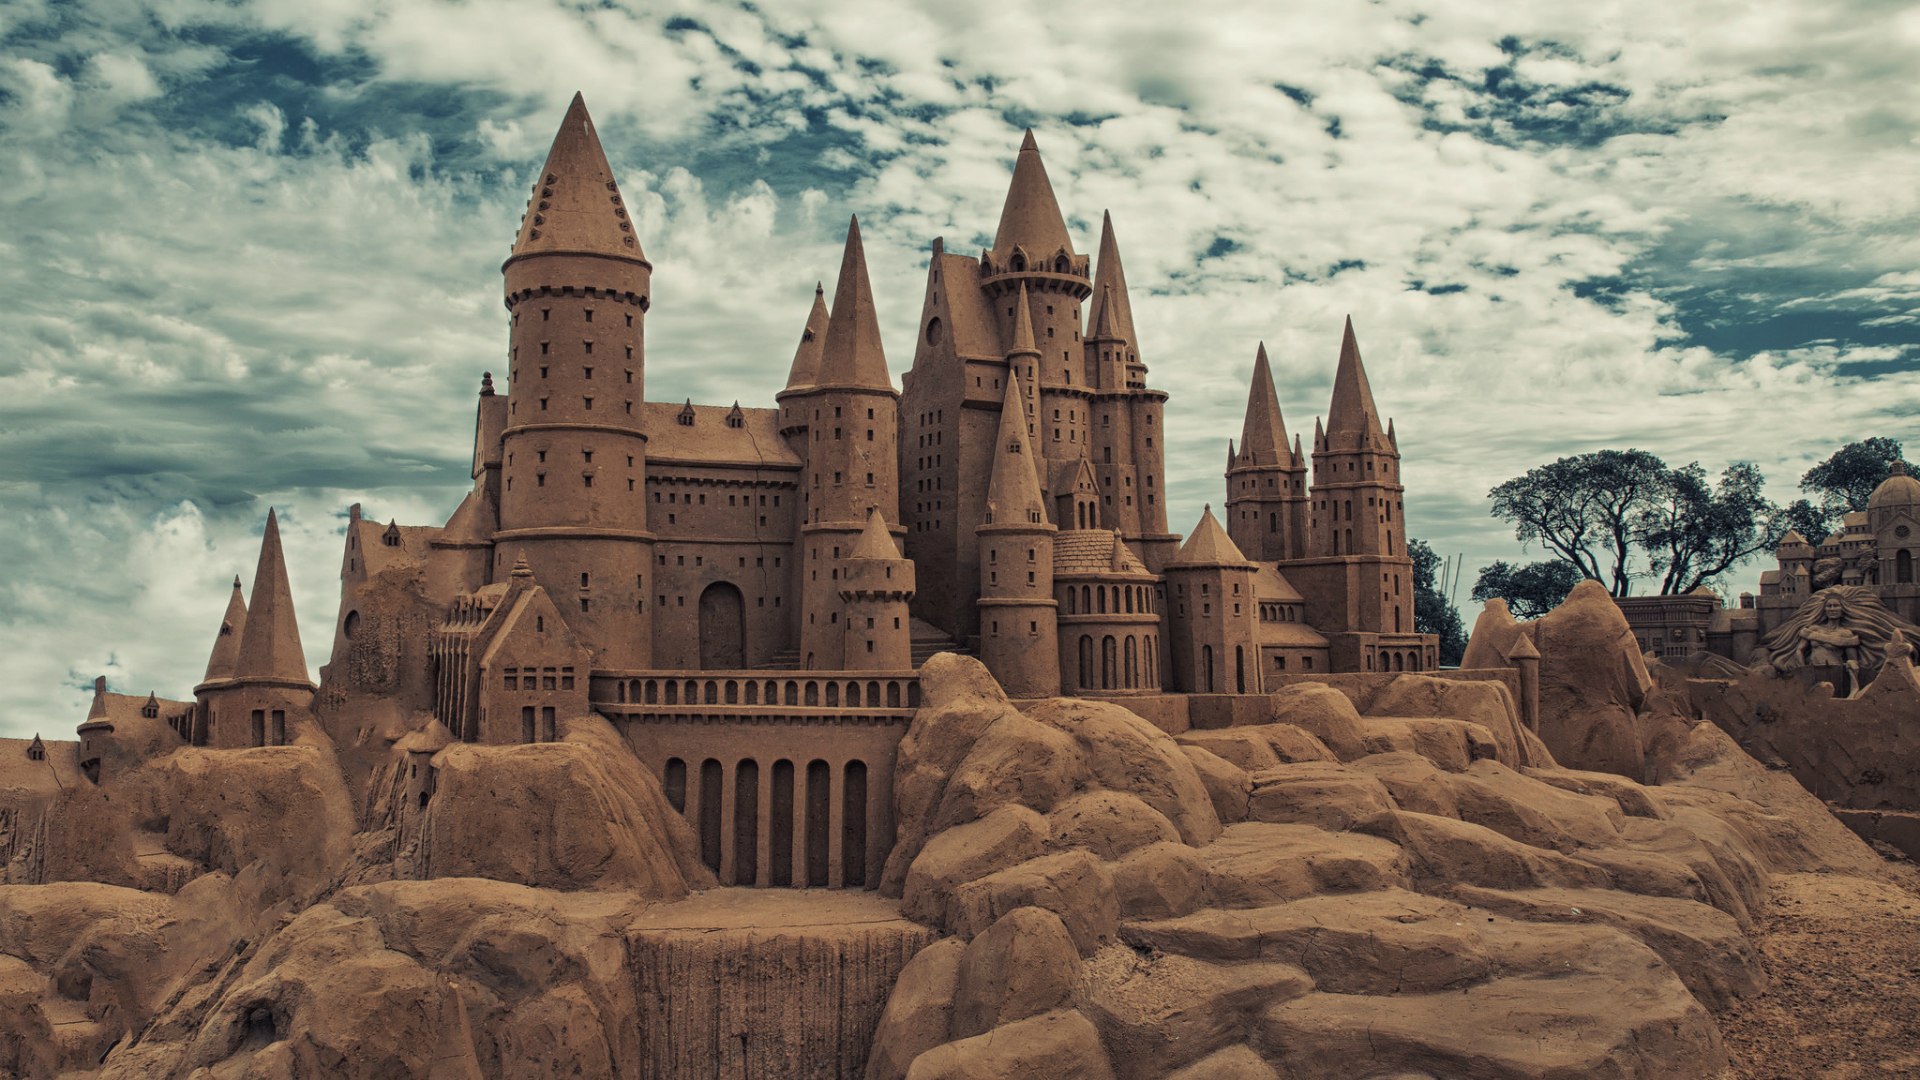 Sand castle wallpapers and images   wallpapers pictures photos